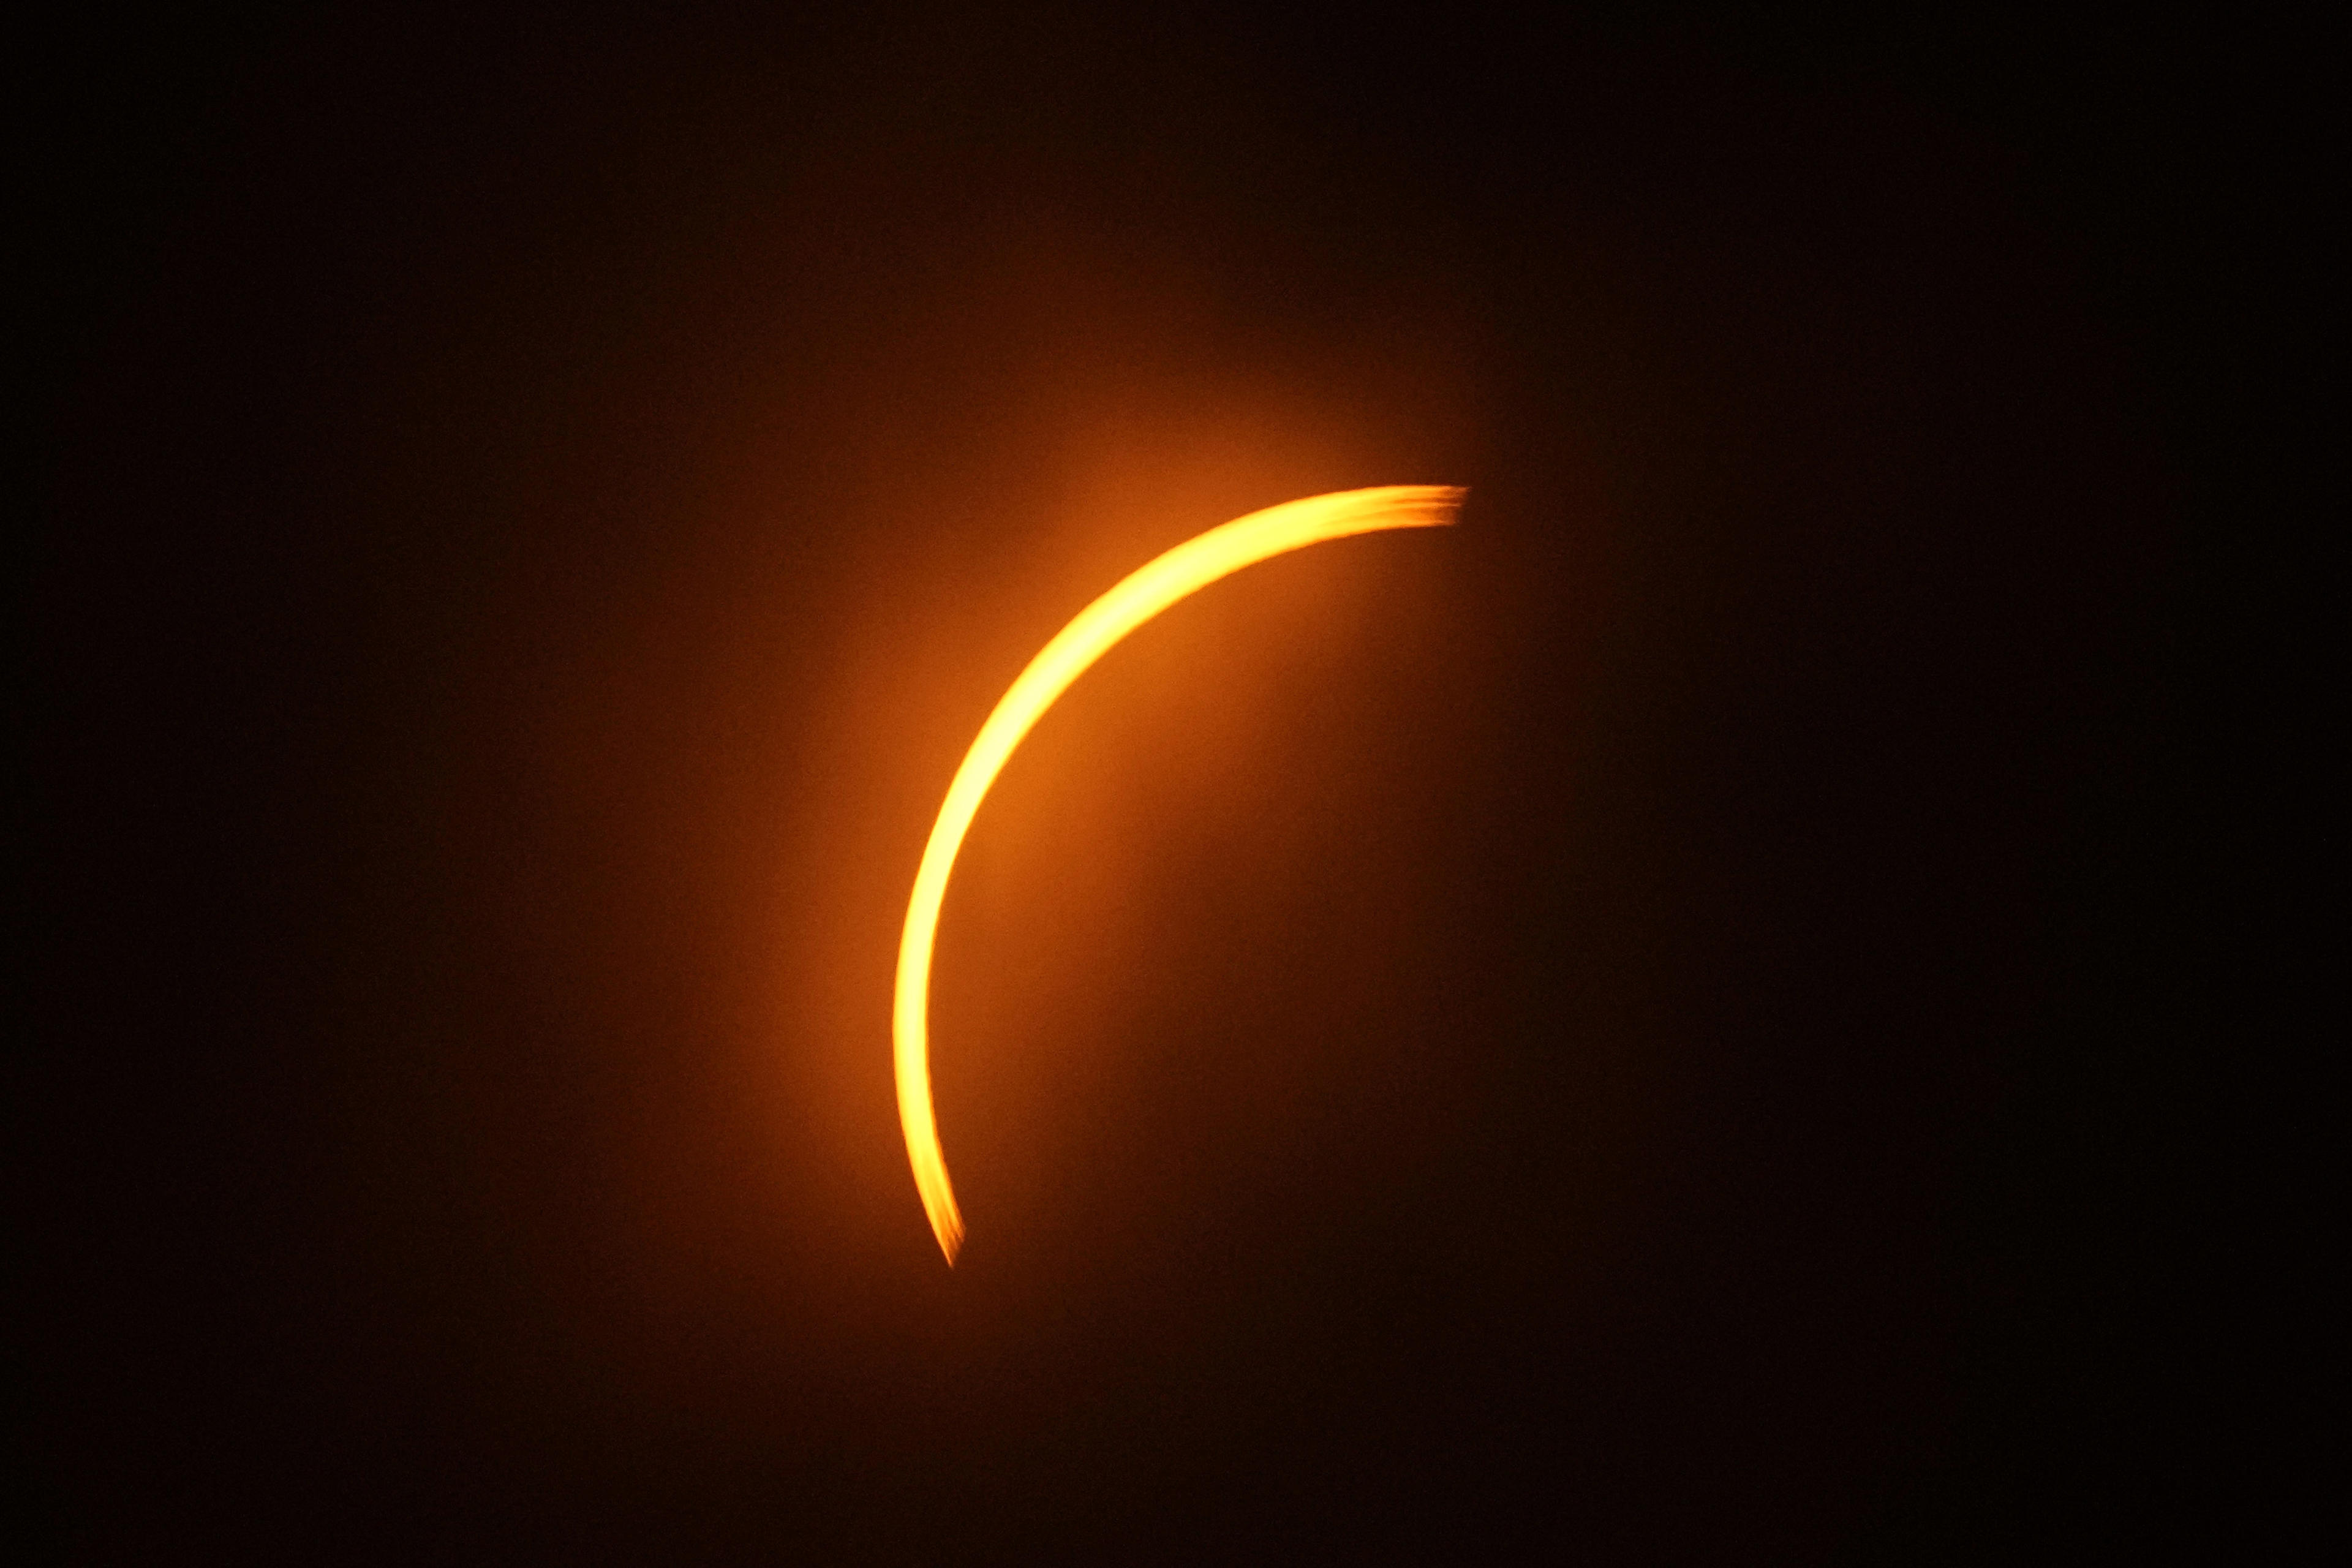 The moon partially covers the sun during a total solar eclipse, as seen from Eagle Pass, Texas.